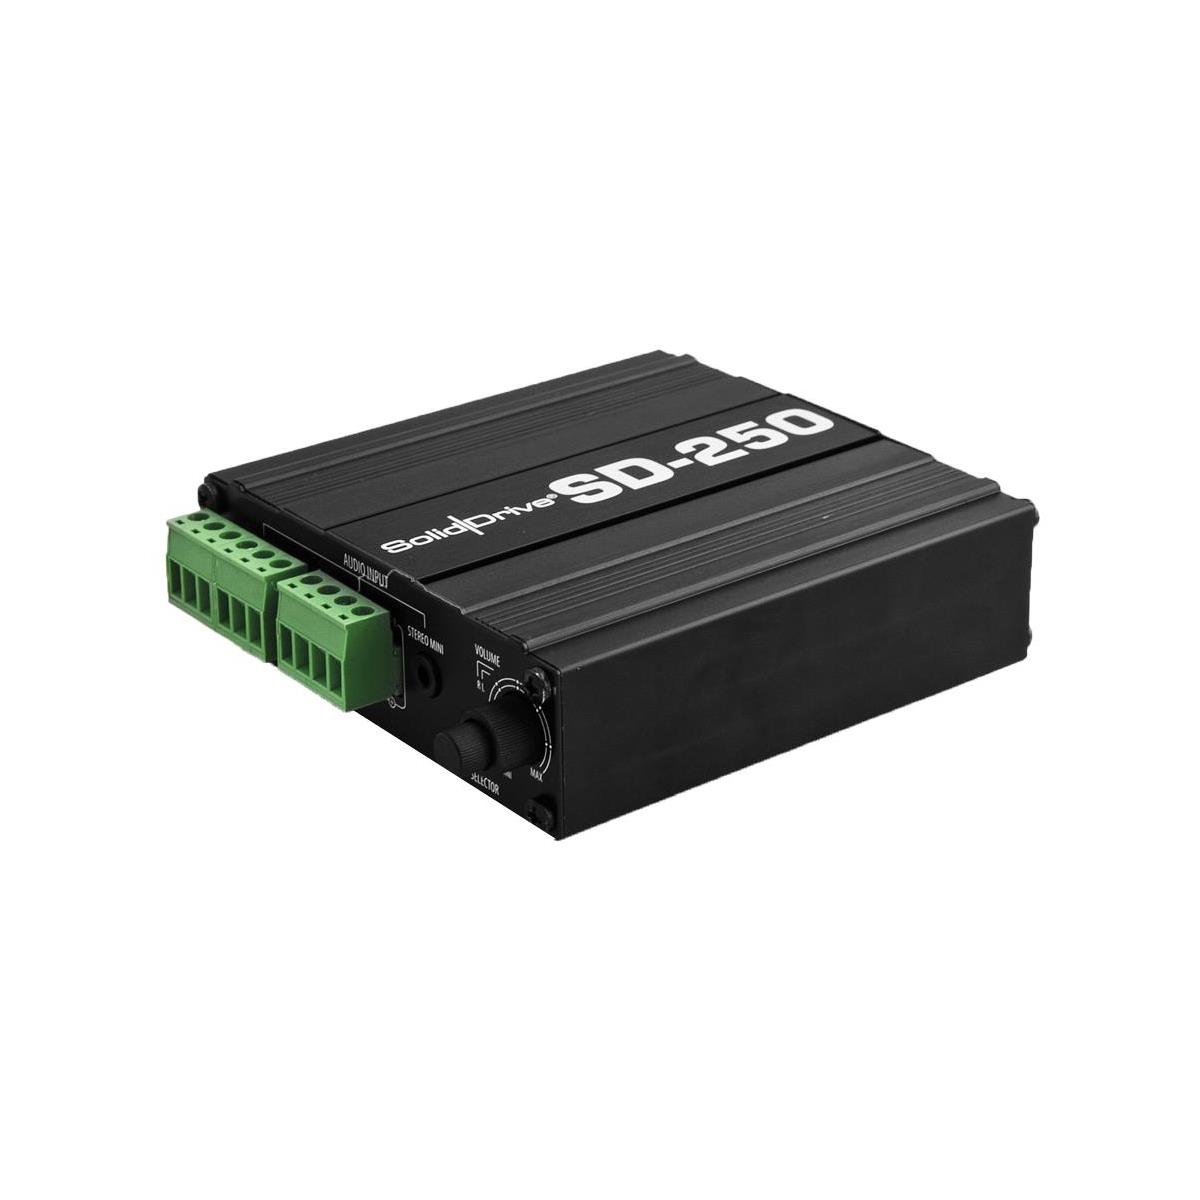 Image of SolidDrive SD-250 50W Per Channel Class D Amplifier